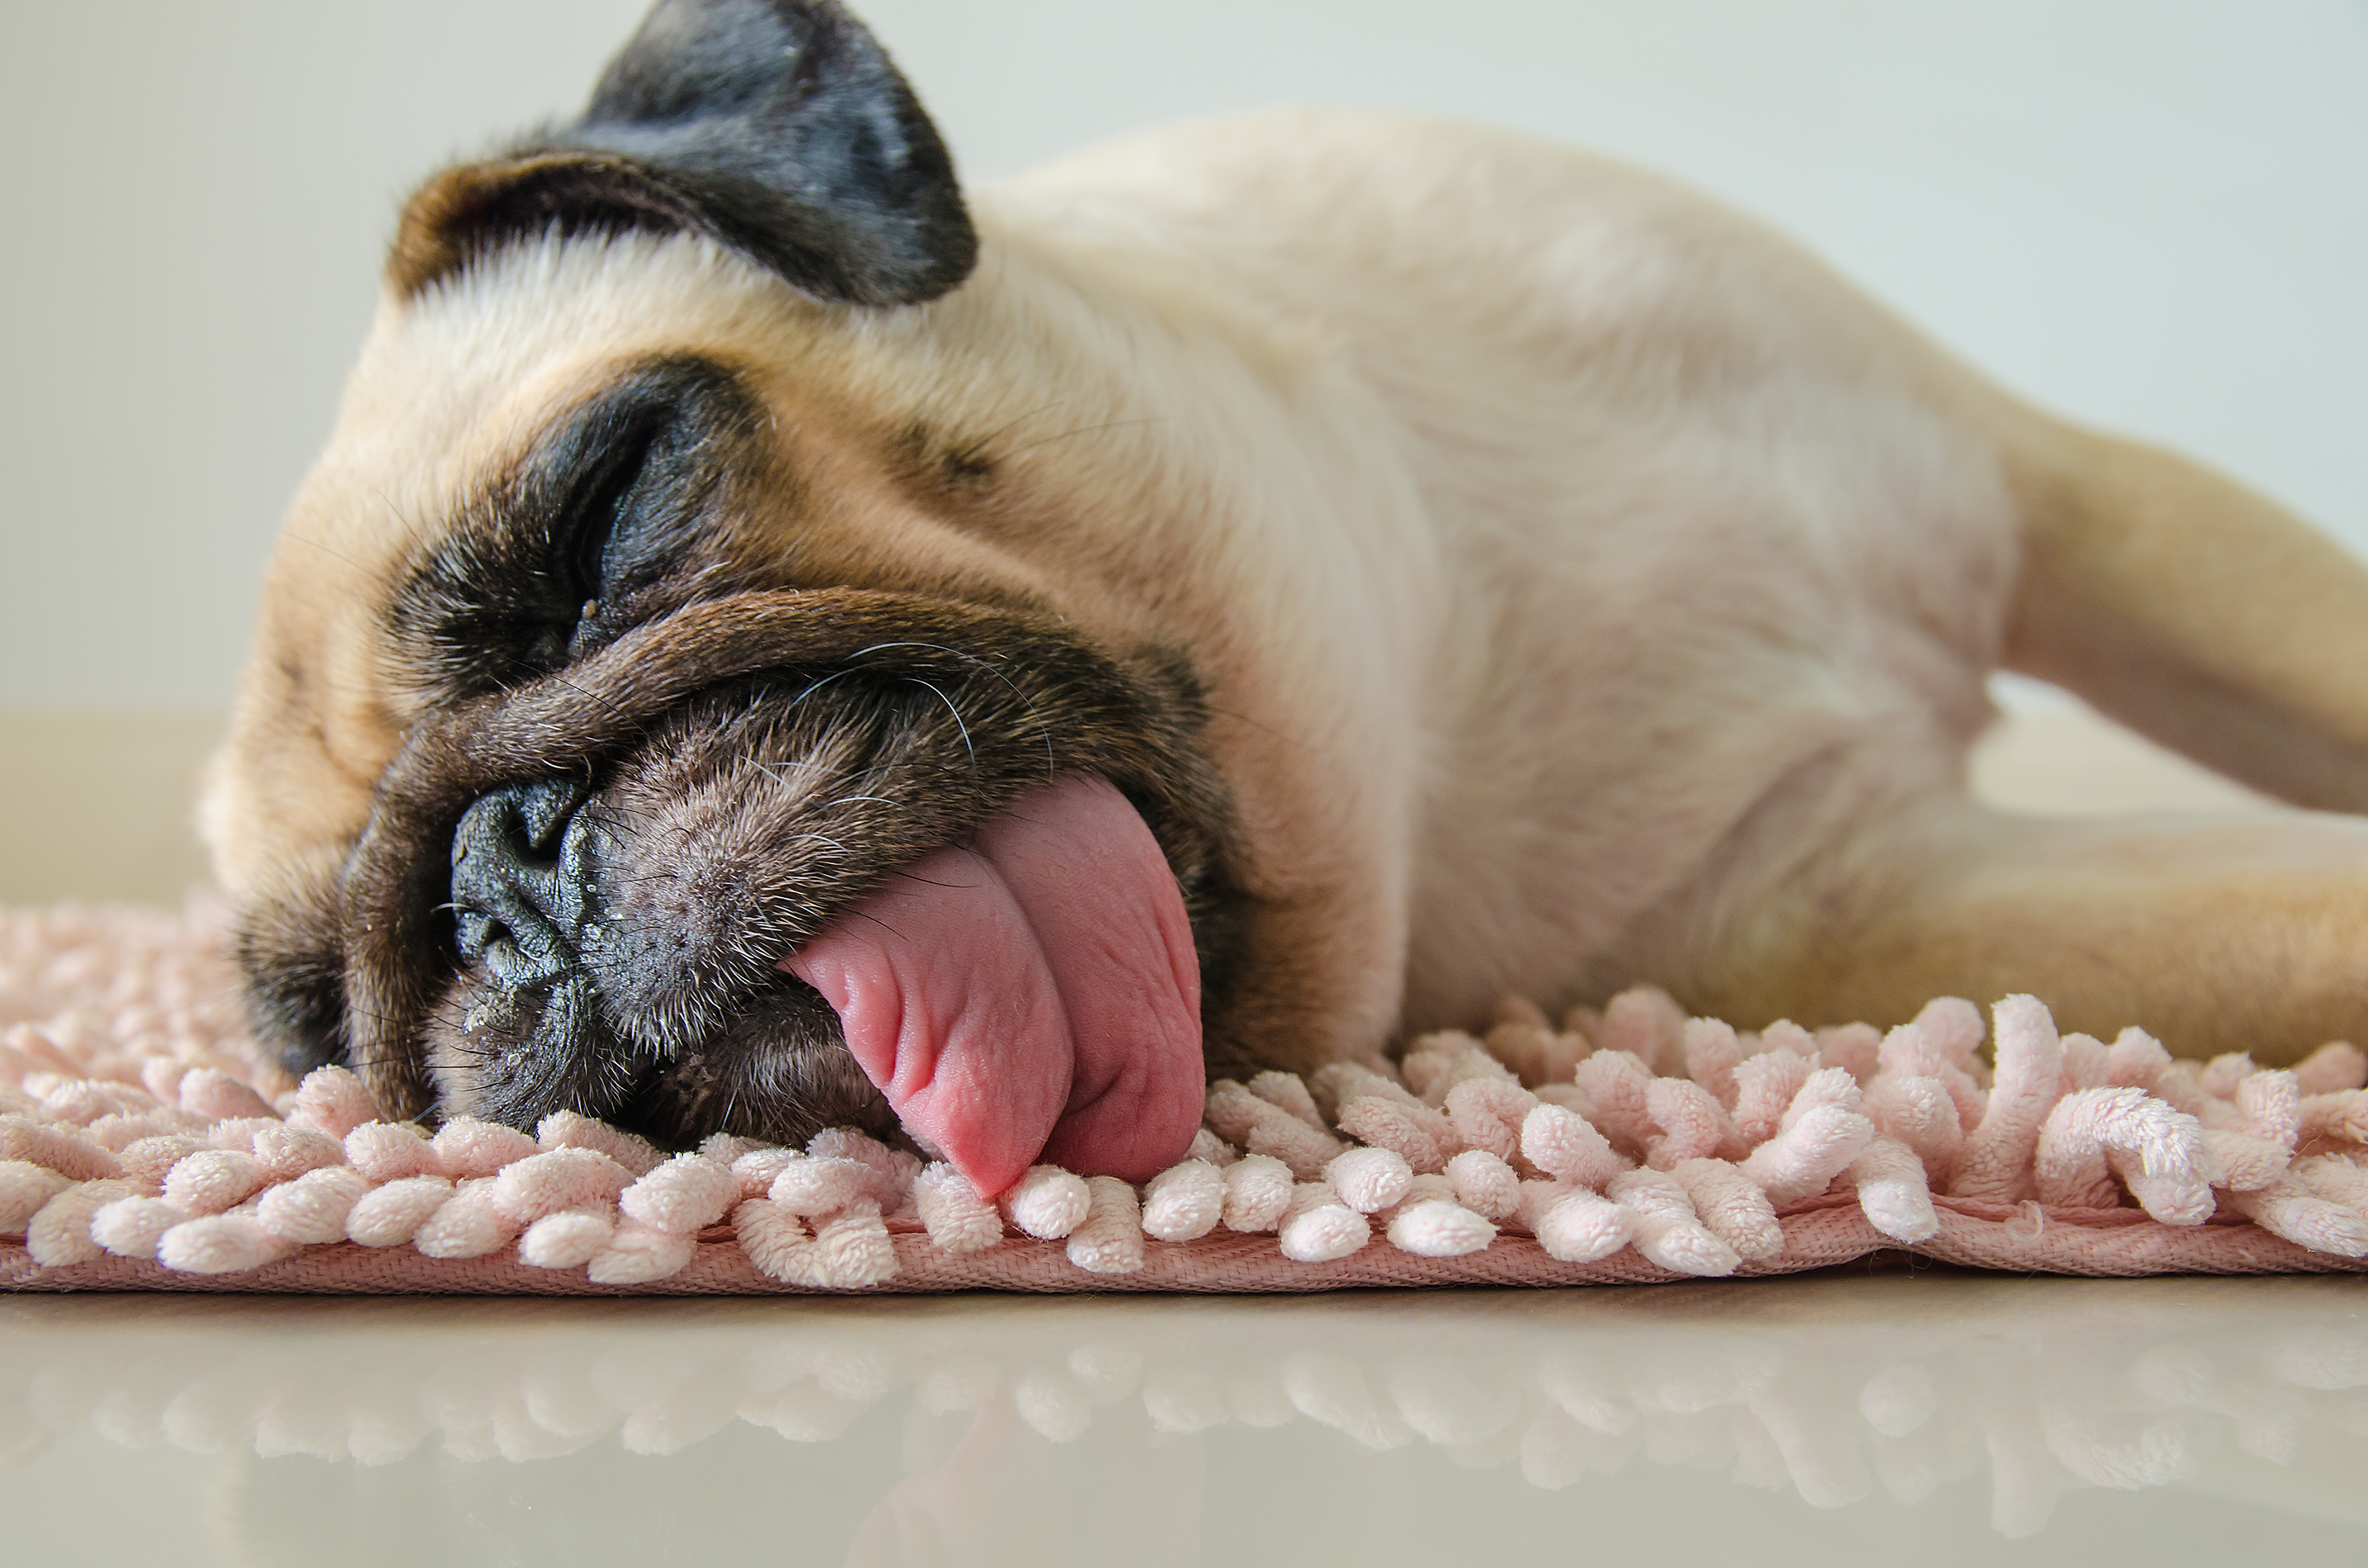 A pug playing dead